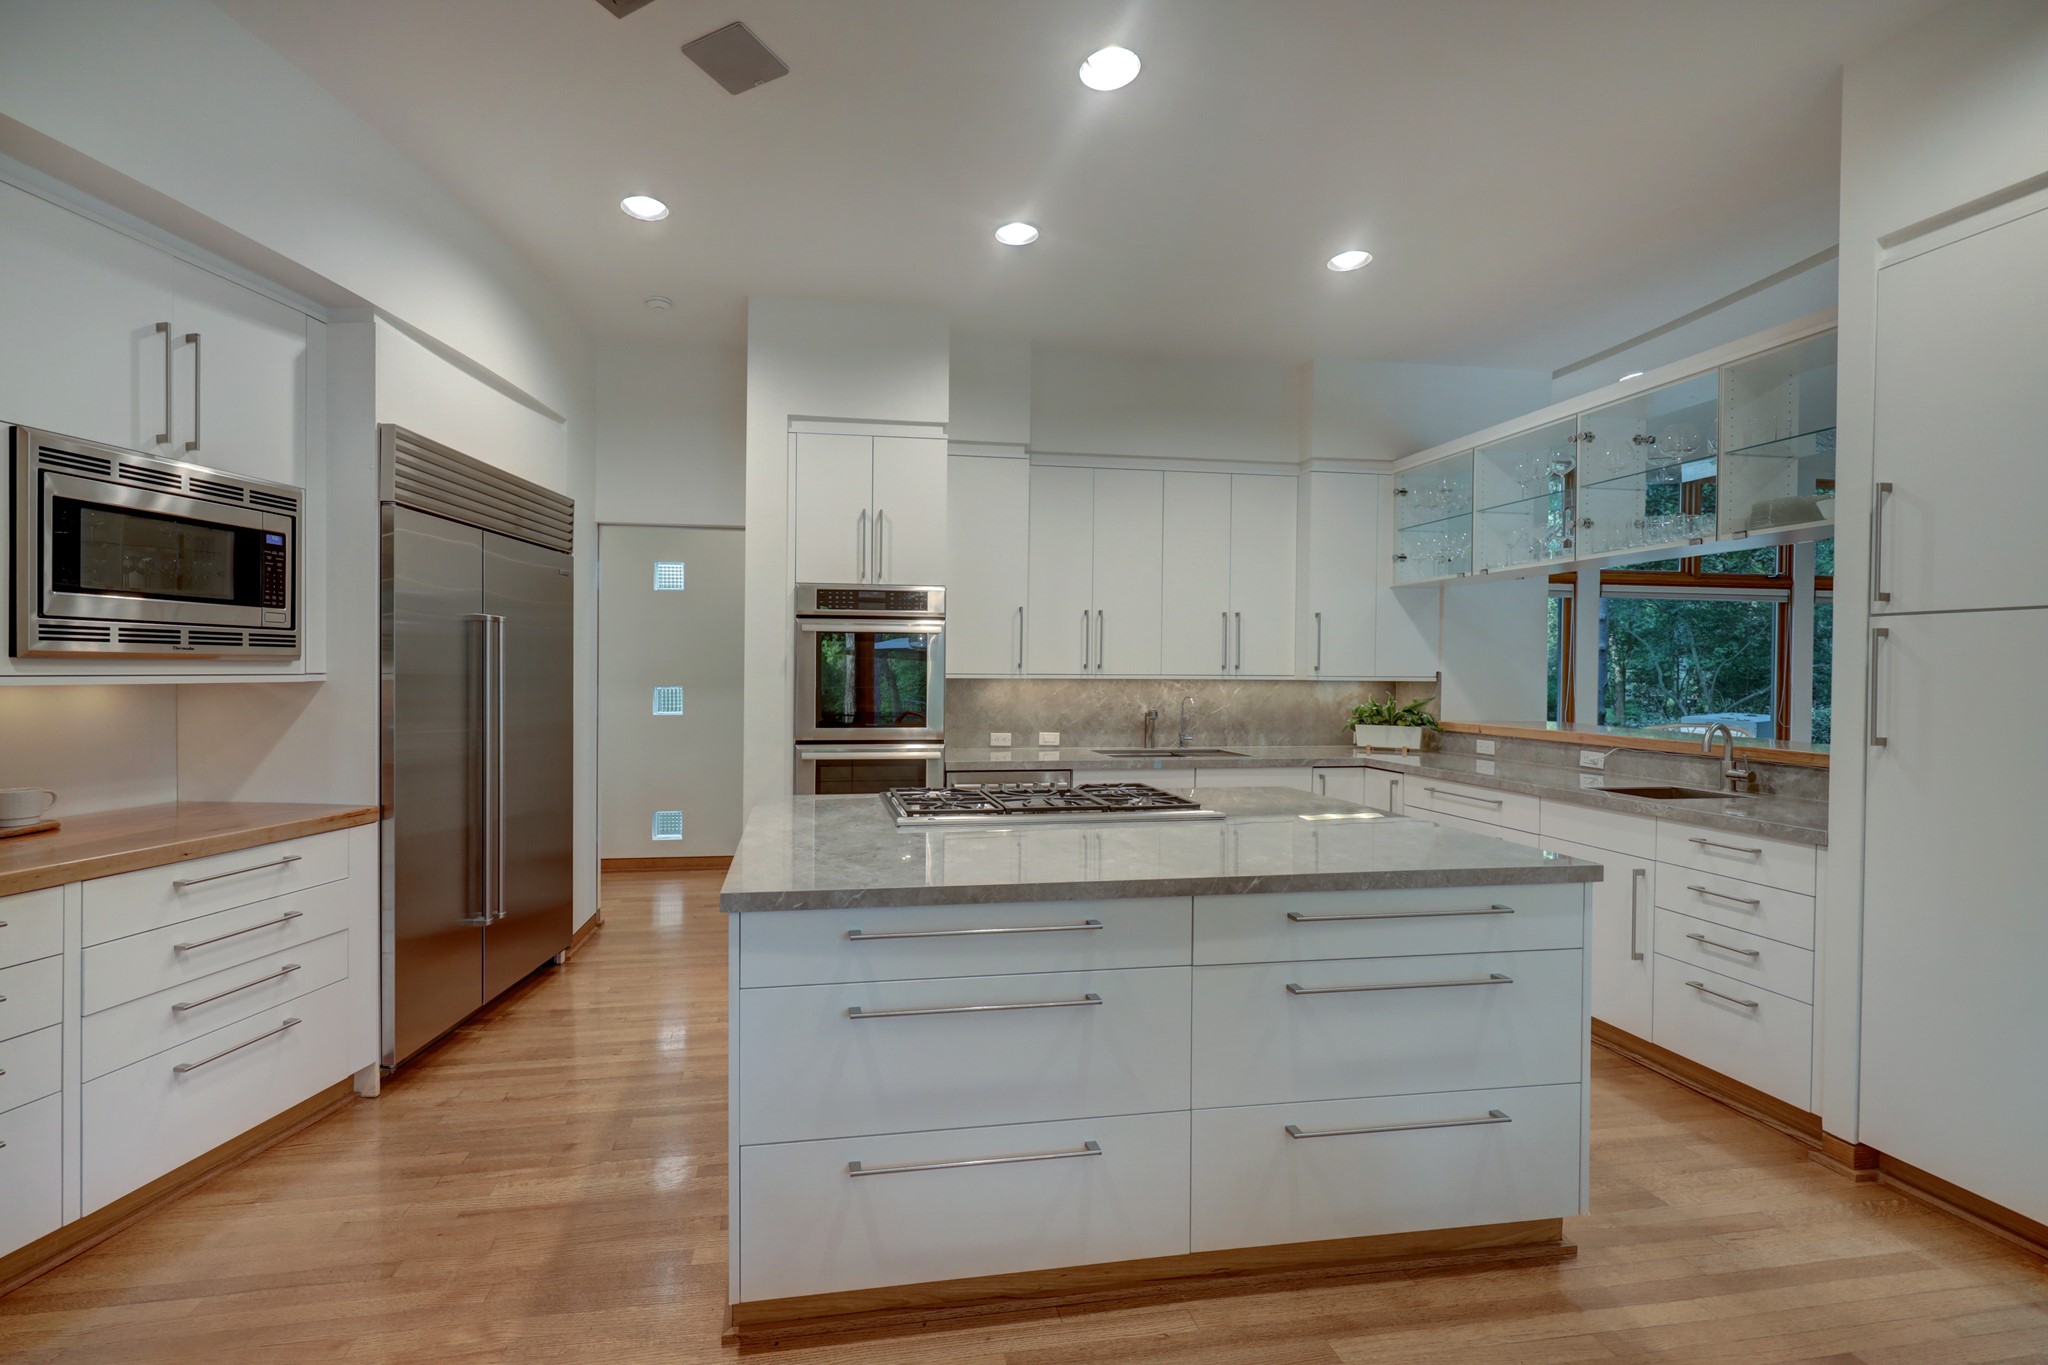 Gourmet Kitchen with top of the line stainless steel appliances, sleek cabinets, moderno Fior Di Bosco porcelain and pecan countertops.